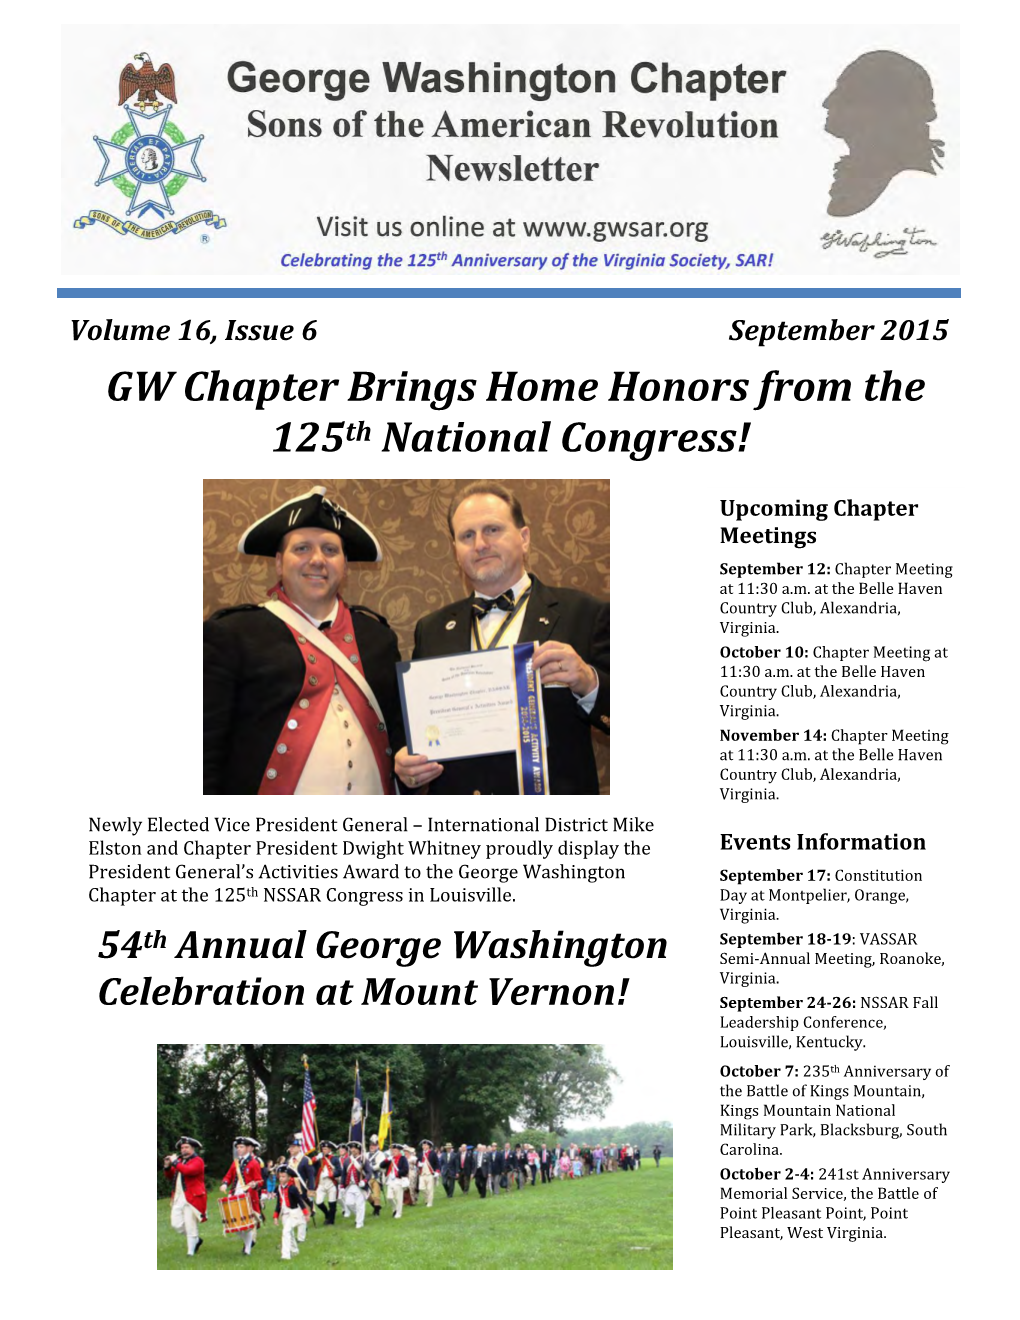 GW Chapter Brings Home Honors from the 125Th National Congress!